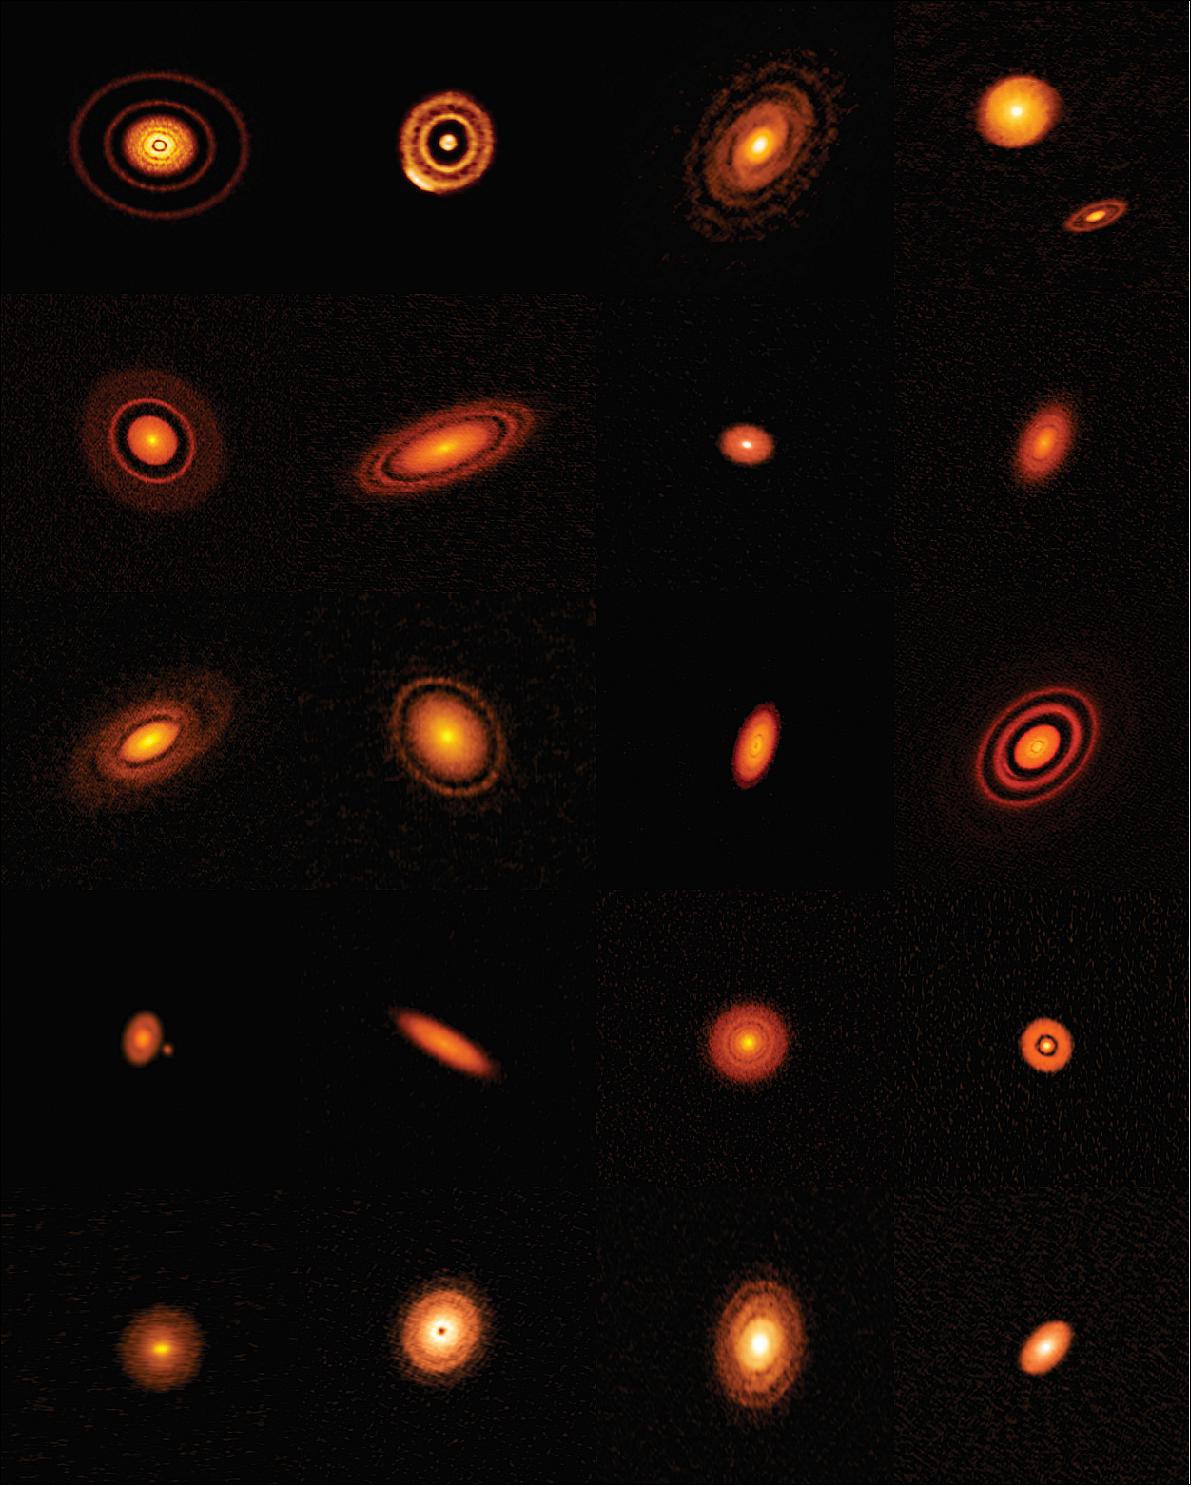 Figure 4: ALMA's high-resolution images of nearby protoplanetary disks, which are results of the Disk Substructures at High Angular Resolution Project (DSHARP), image credit: ALMA (ESO/NAOJ/NRAO), S. Andrews et al.; NRAO/AUI/NSF, S. Dagnello